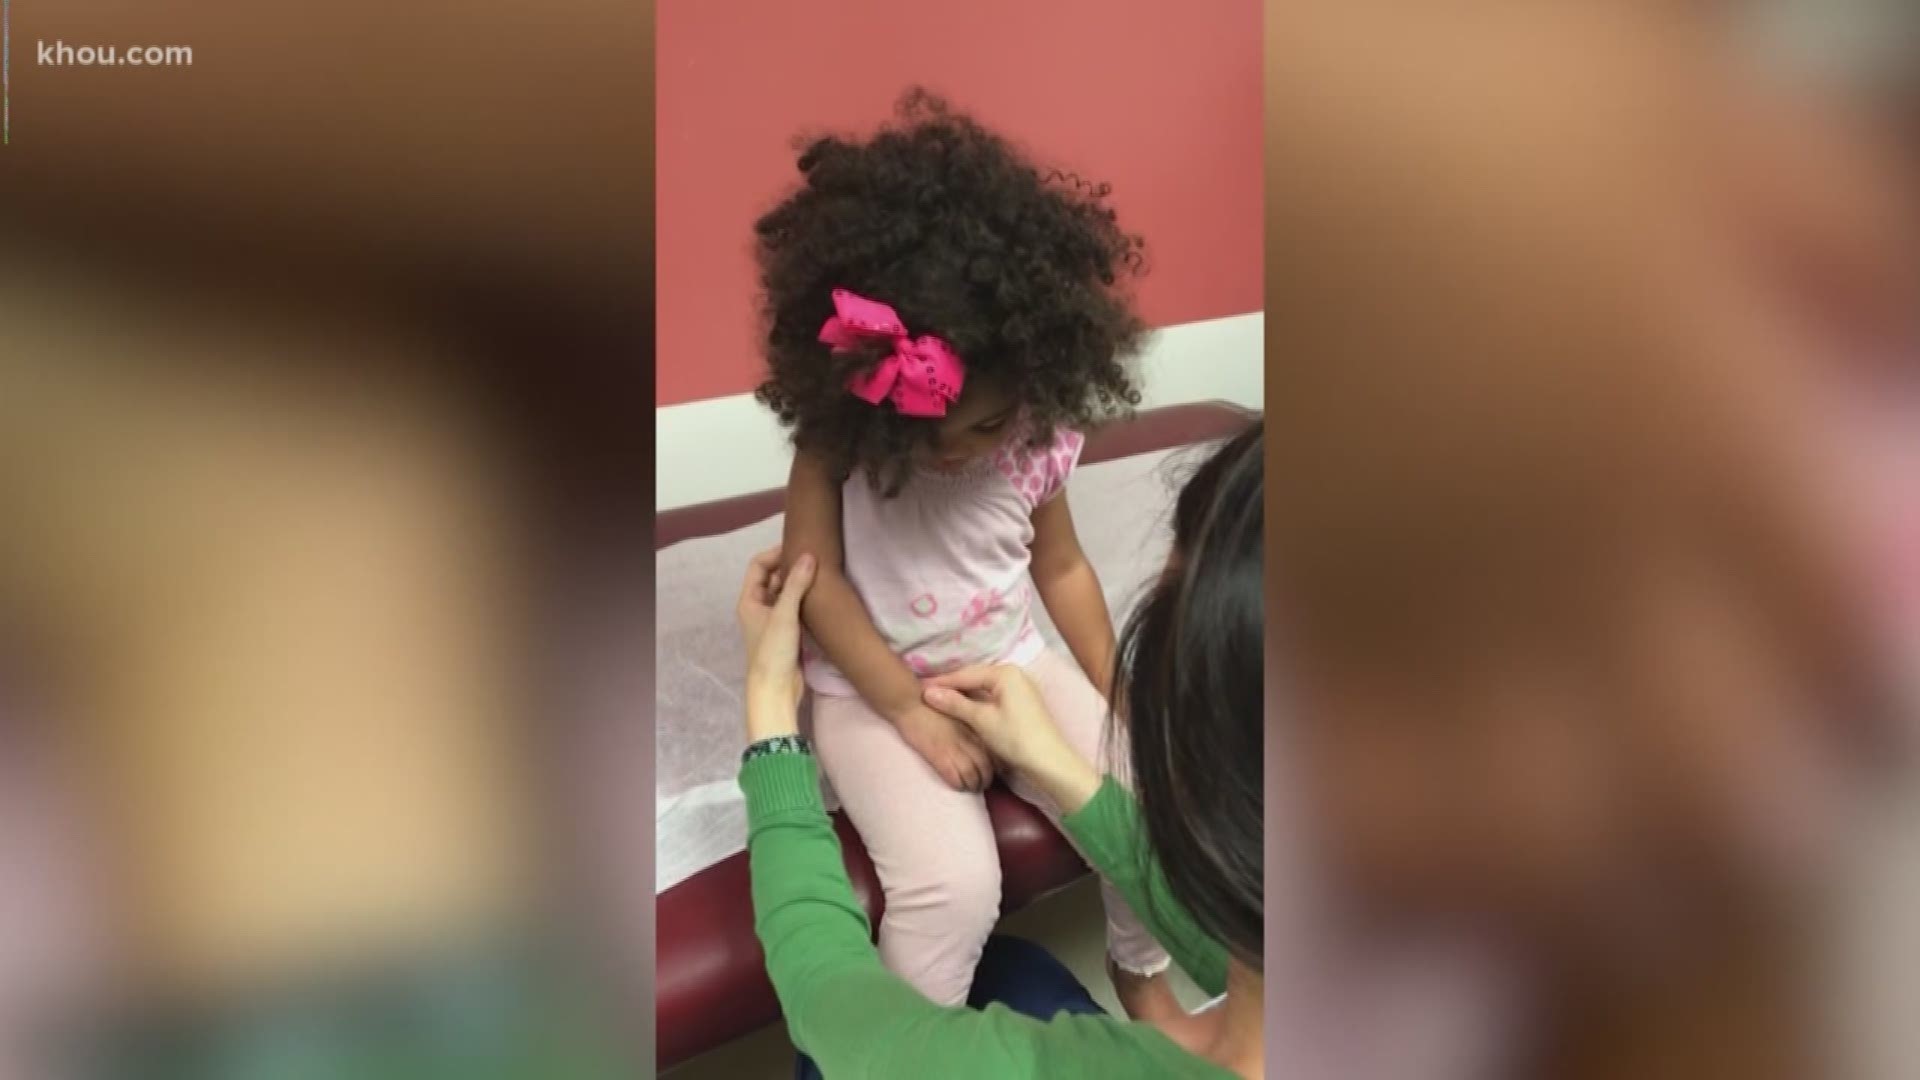 At least two children in the Greater Houston Area have contracted a rare illness that mimics polio and can cause paralysis in children. 
Acute flaccid myelitis affects a person's nervous system and can paralyze a child's arms and legs.